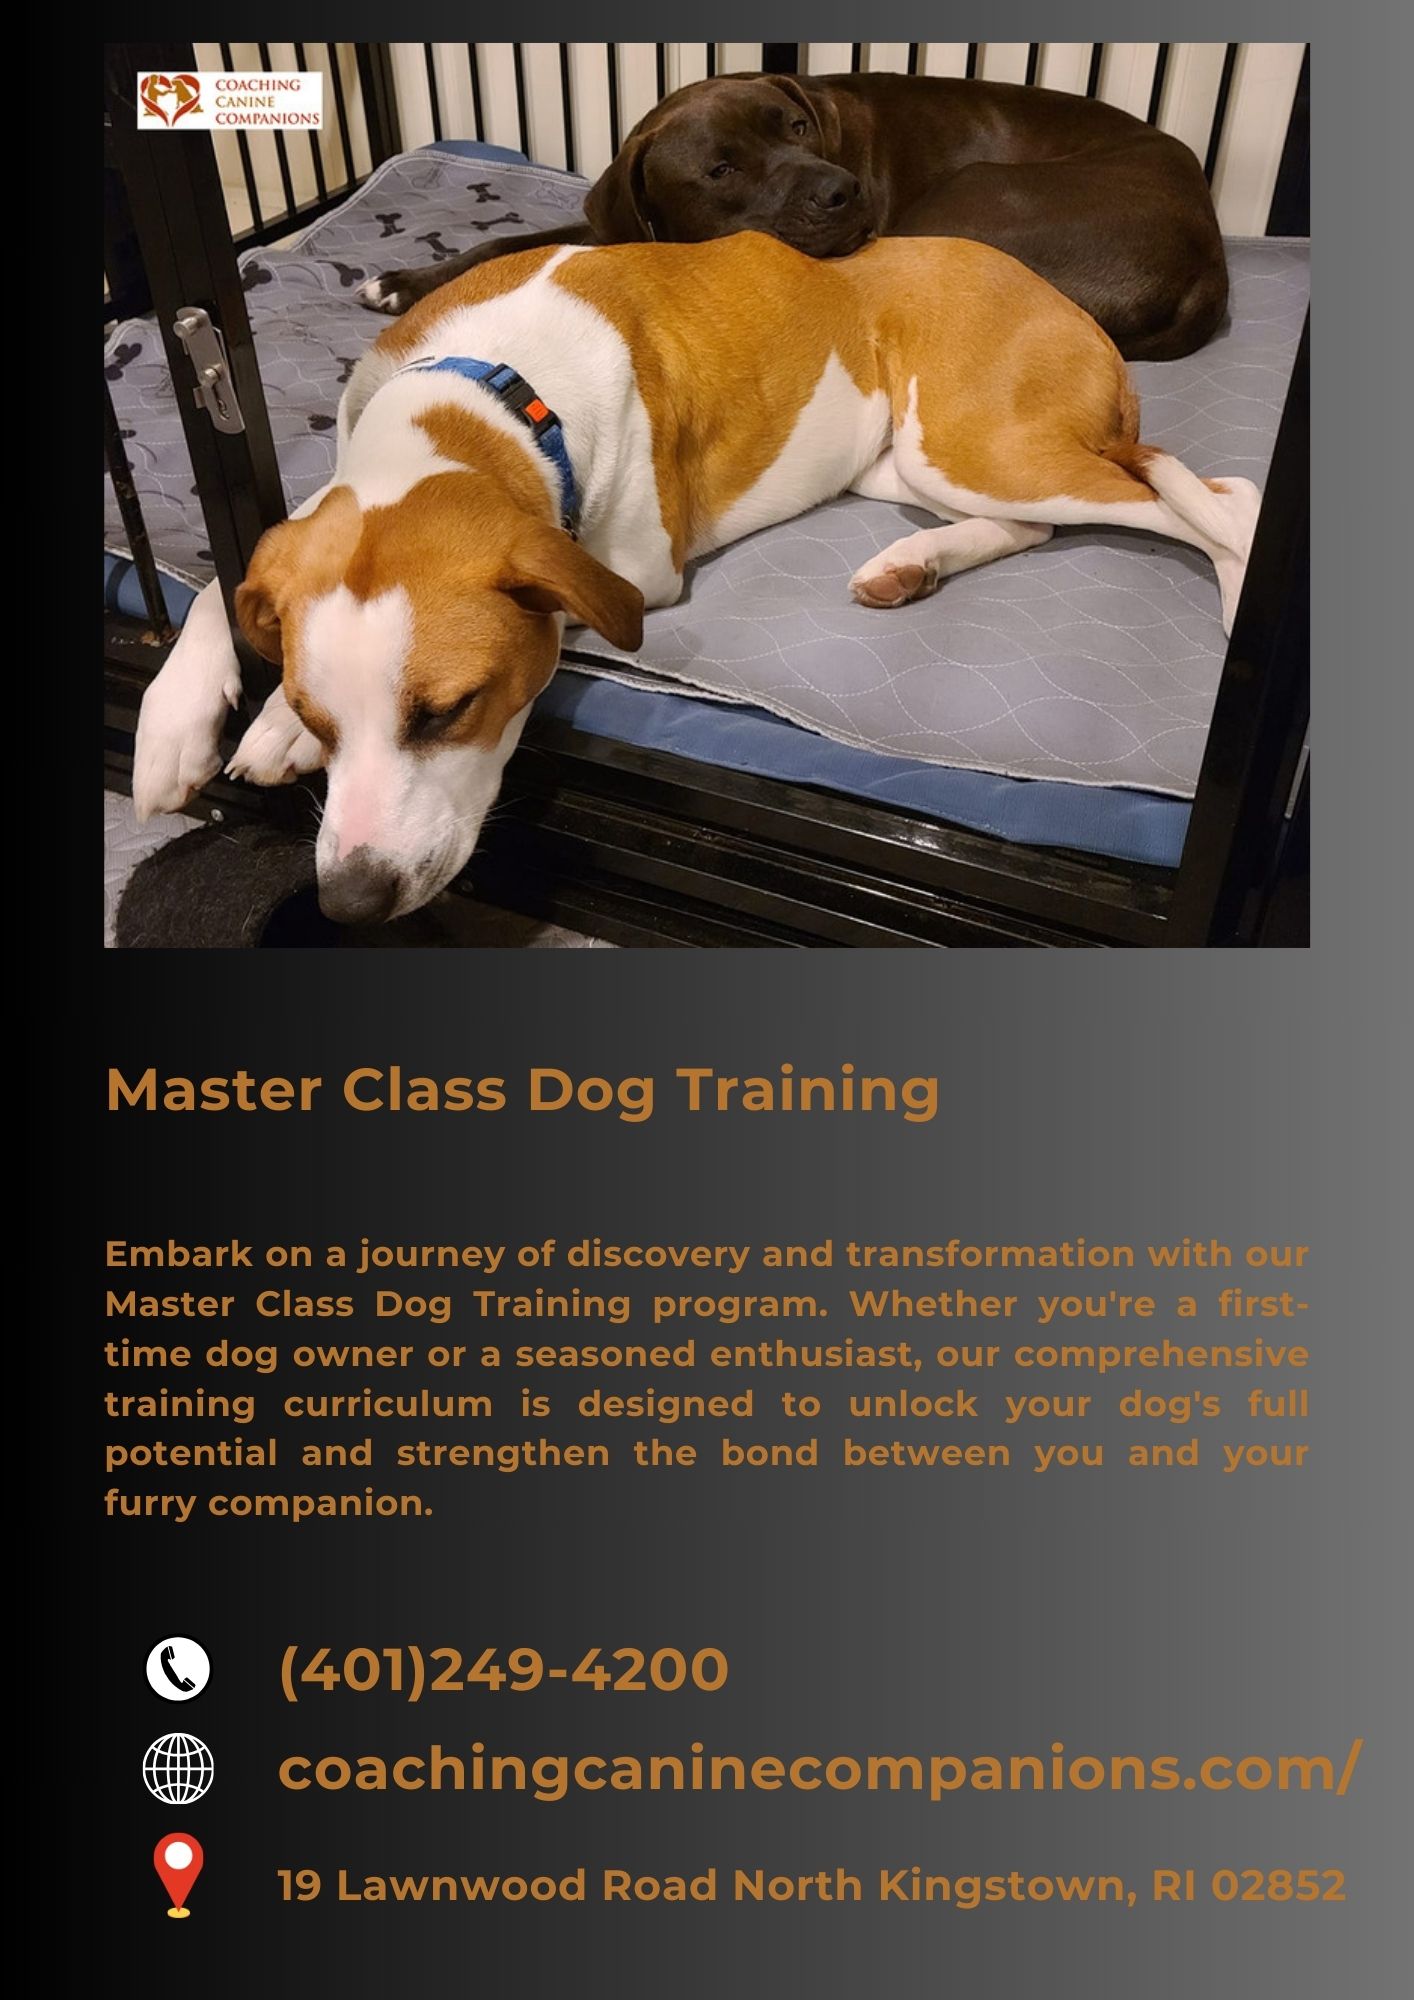  Unleash Your Dog's Potential: Master Class Dog Training